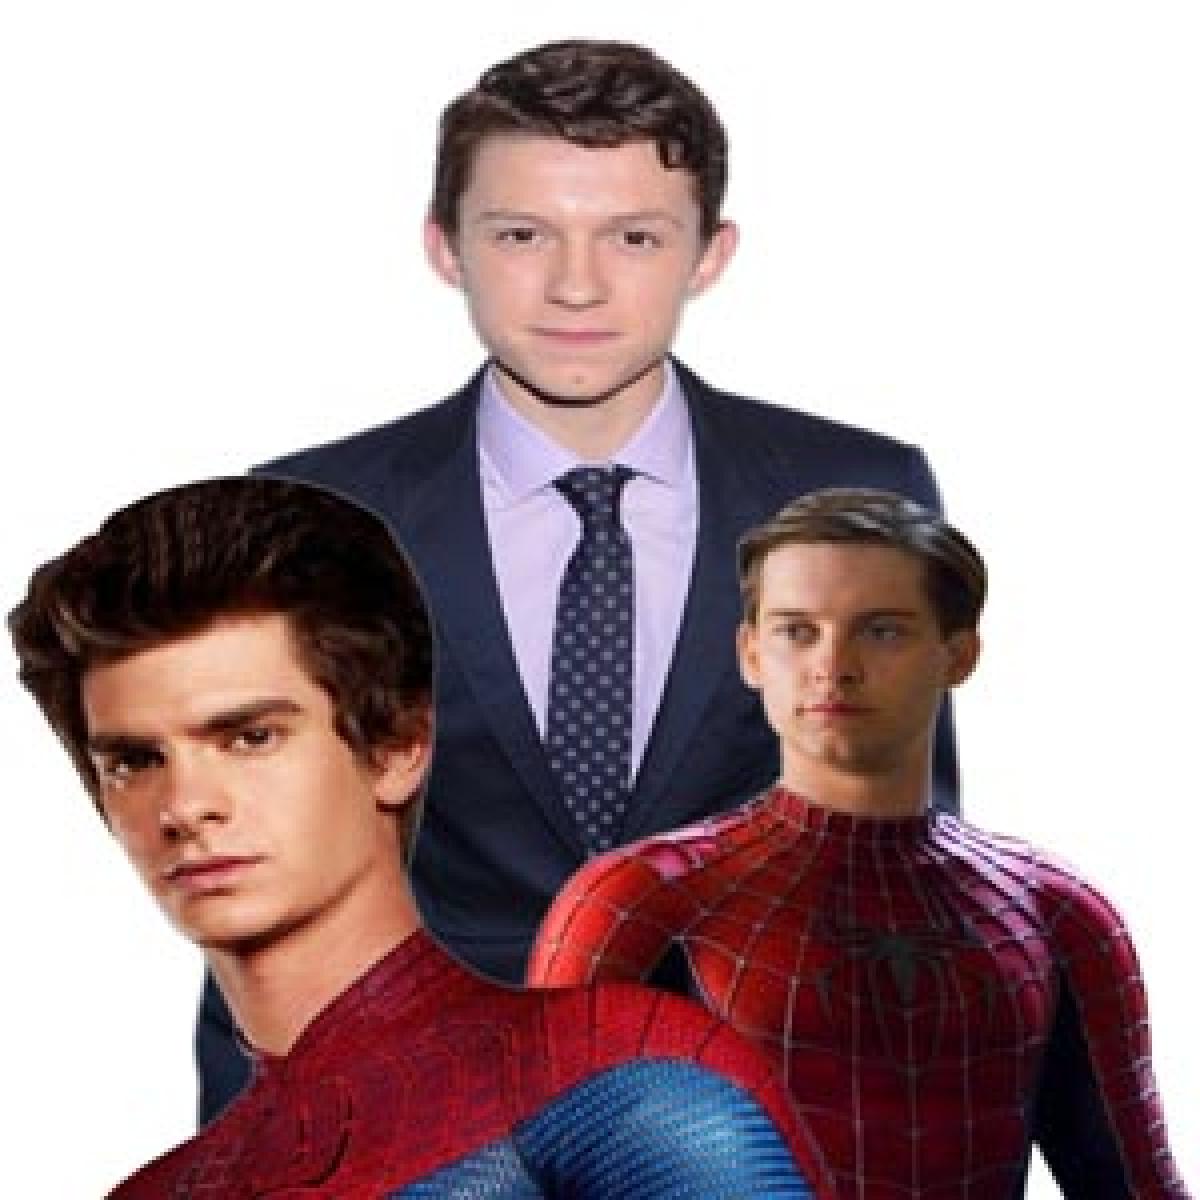 Holland didnt meet Maguire, Garfield over Spider-Man role